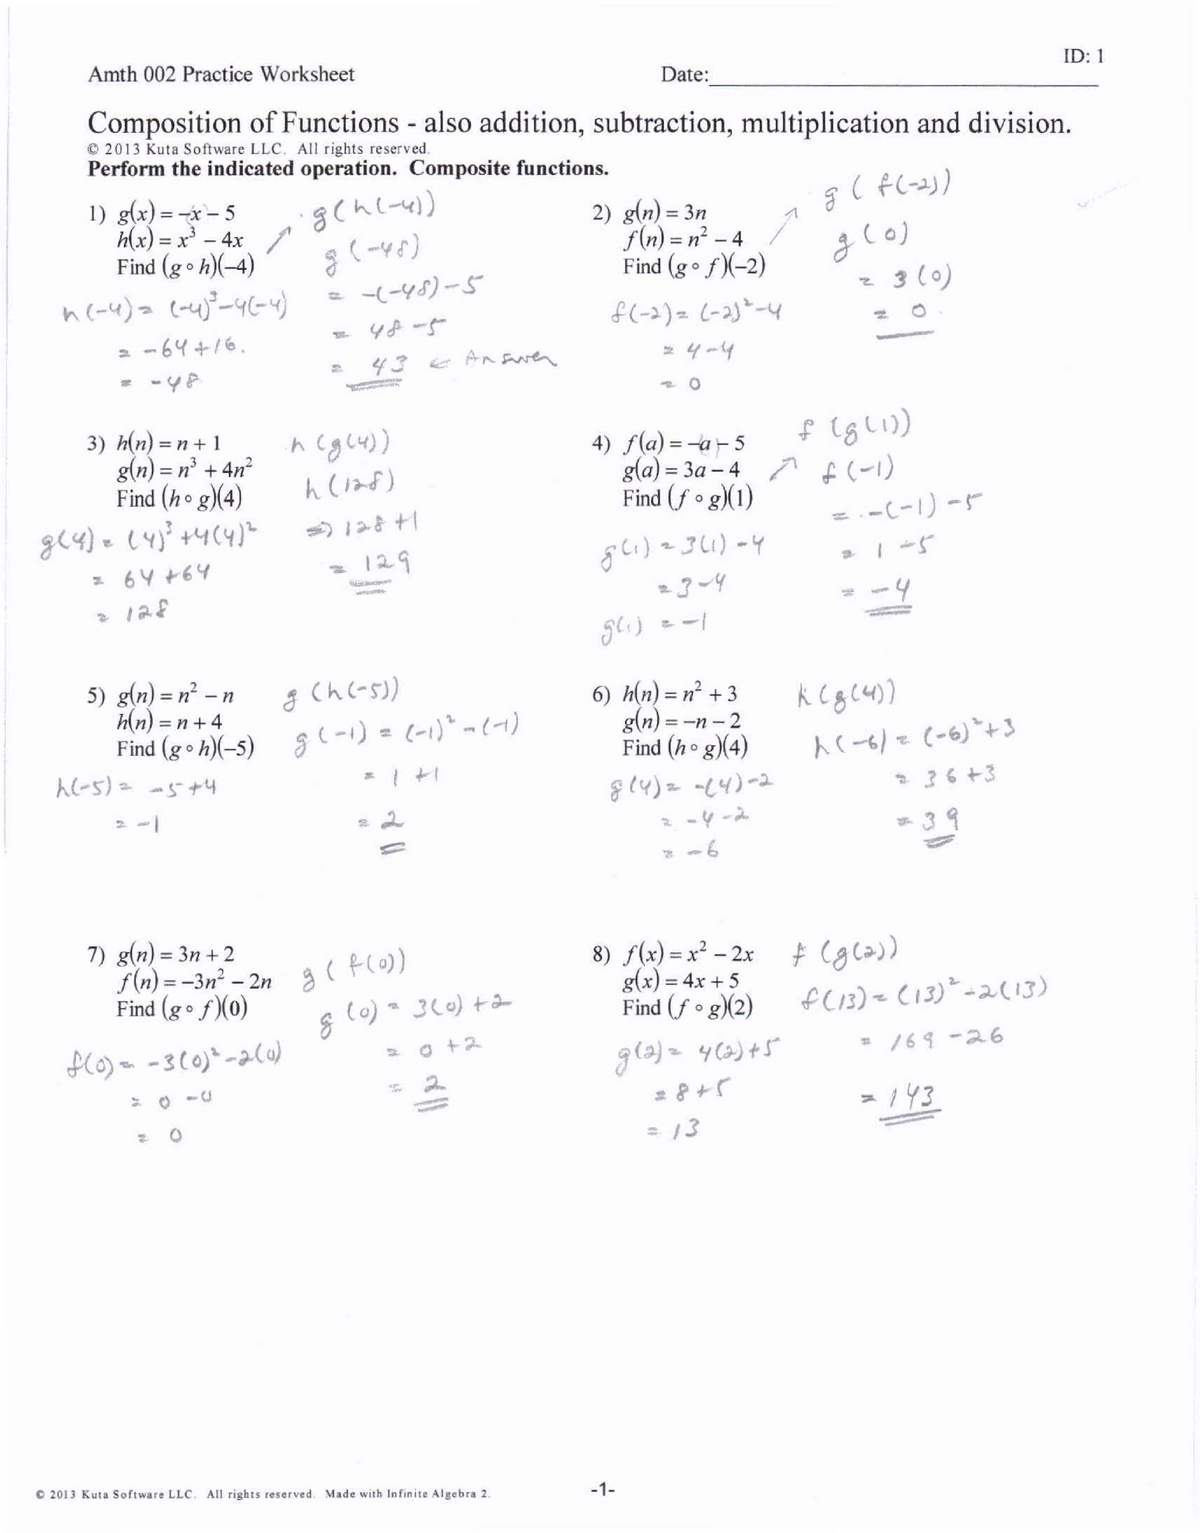 Composition of Functions Answers - AMTH 25 - Mathematics II - UR In Composite Function Worksheet Answers